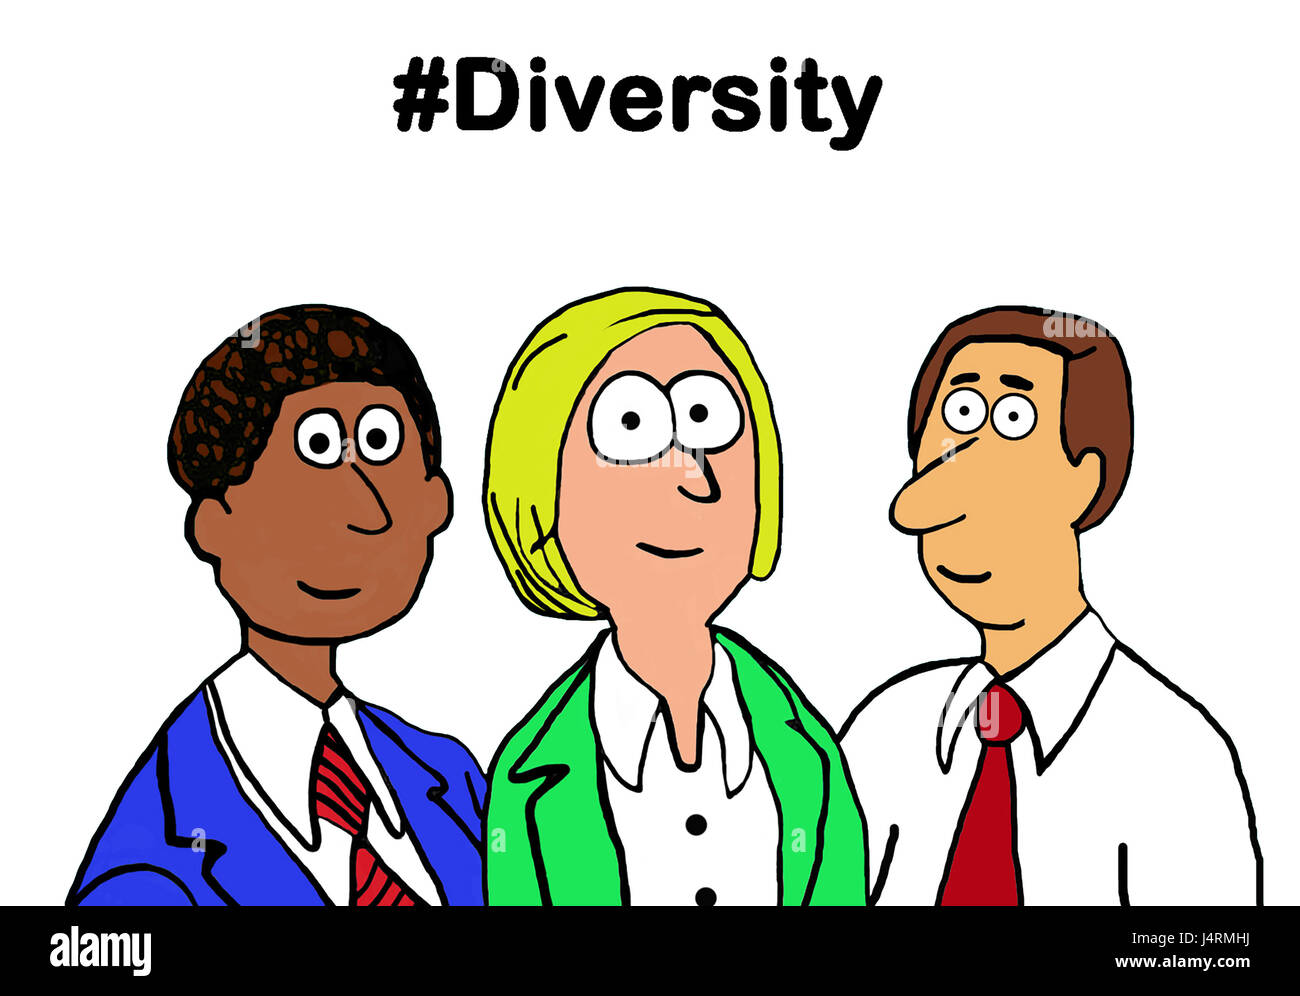 Business cartoon illustration showing three diverse people and '#Diversity'. Stock Photo